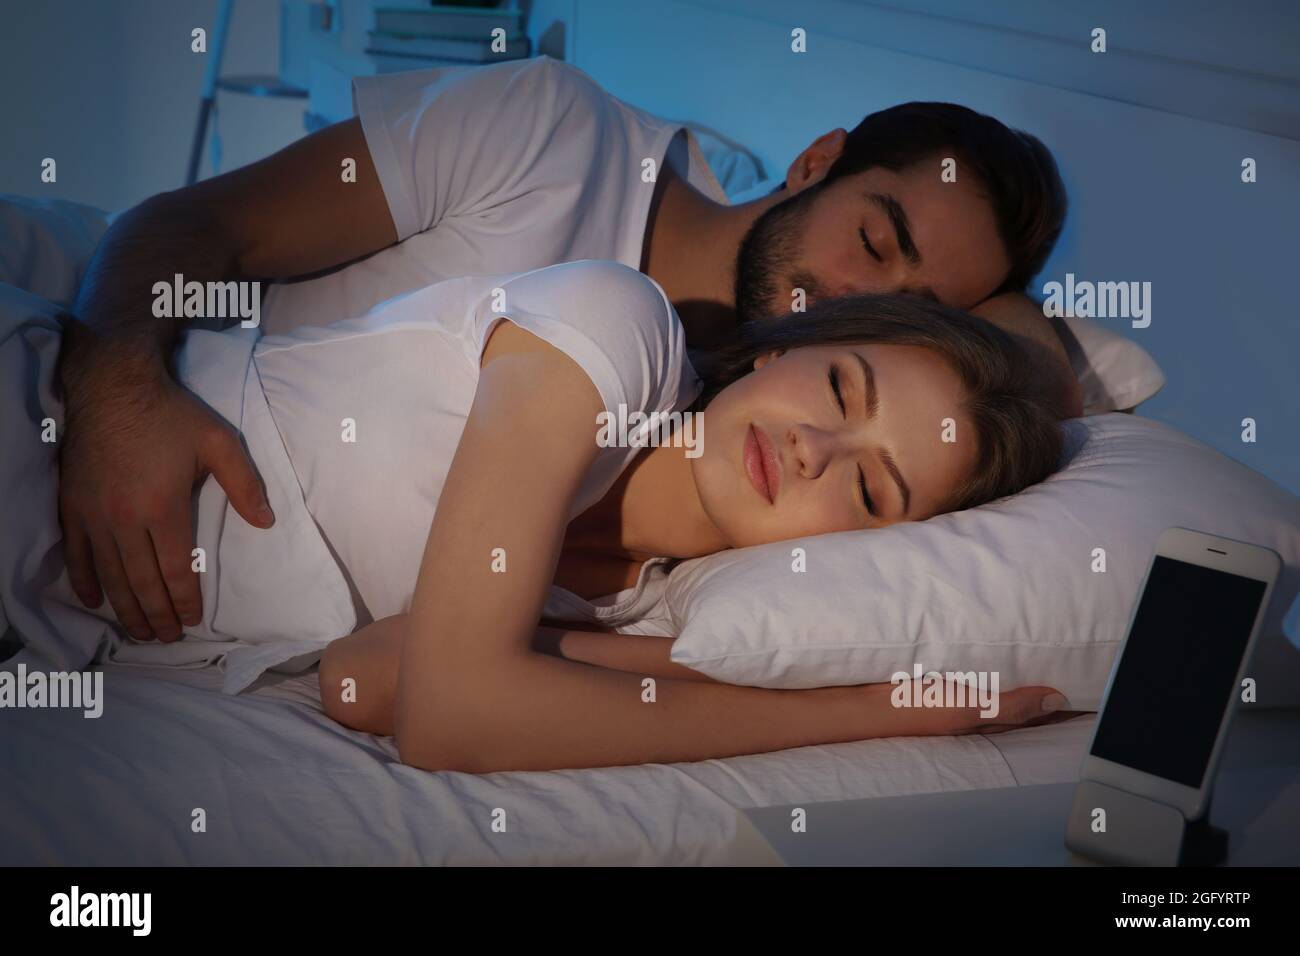 Young cute couple sleeping together in bed Stock Photo - Alamy